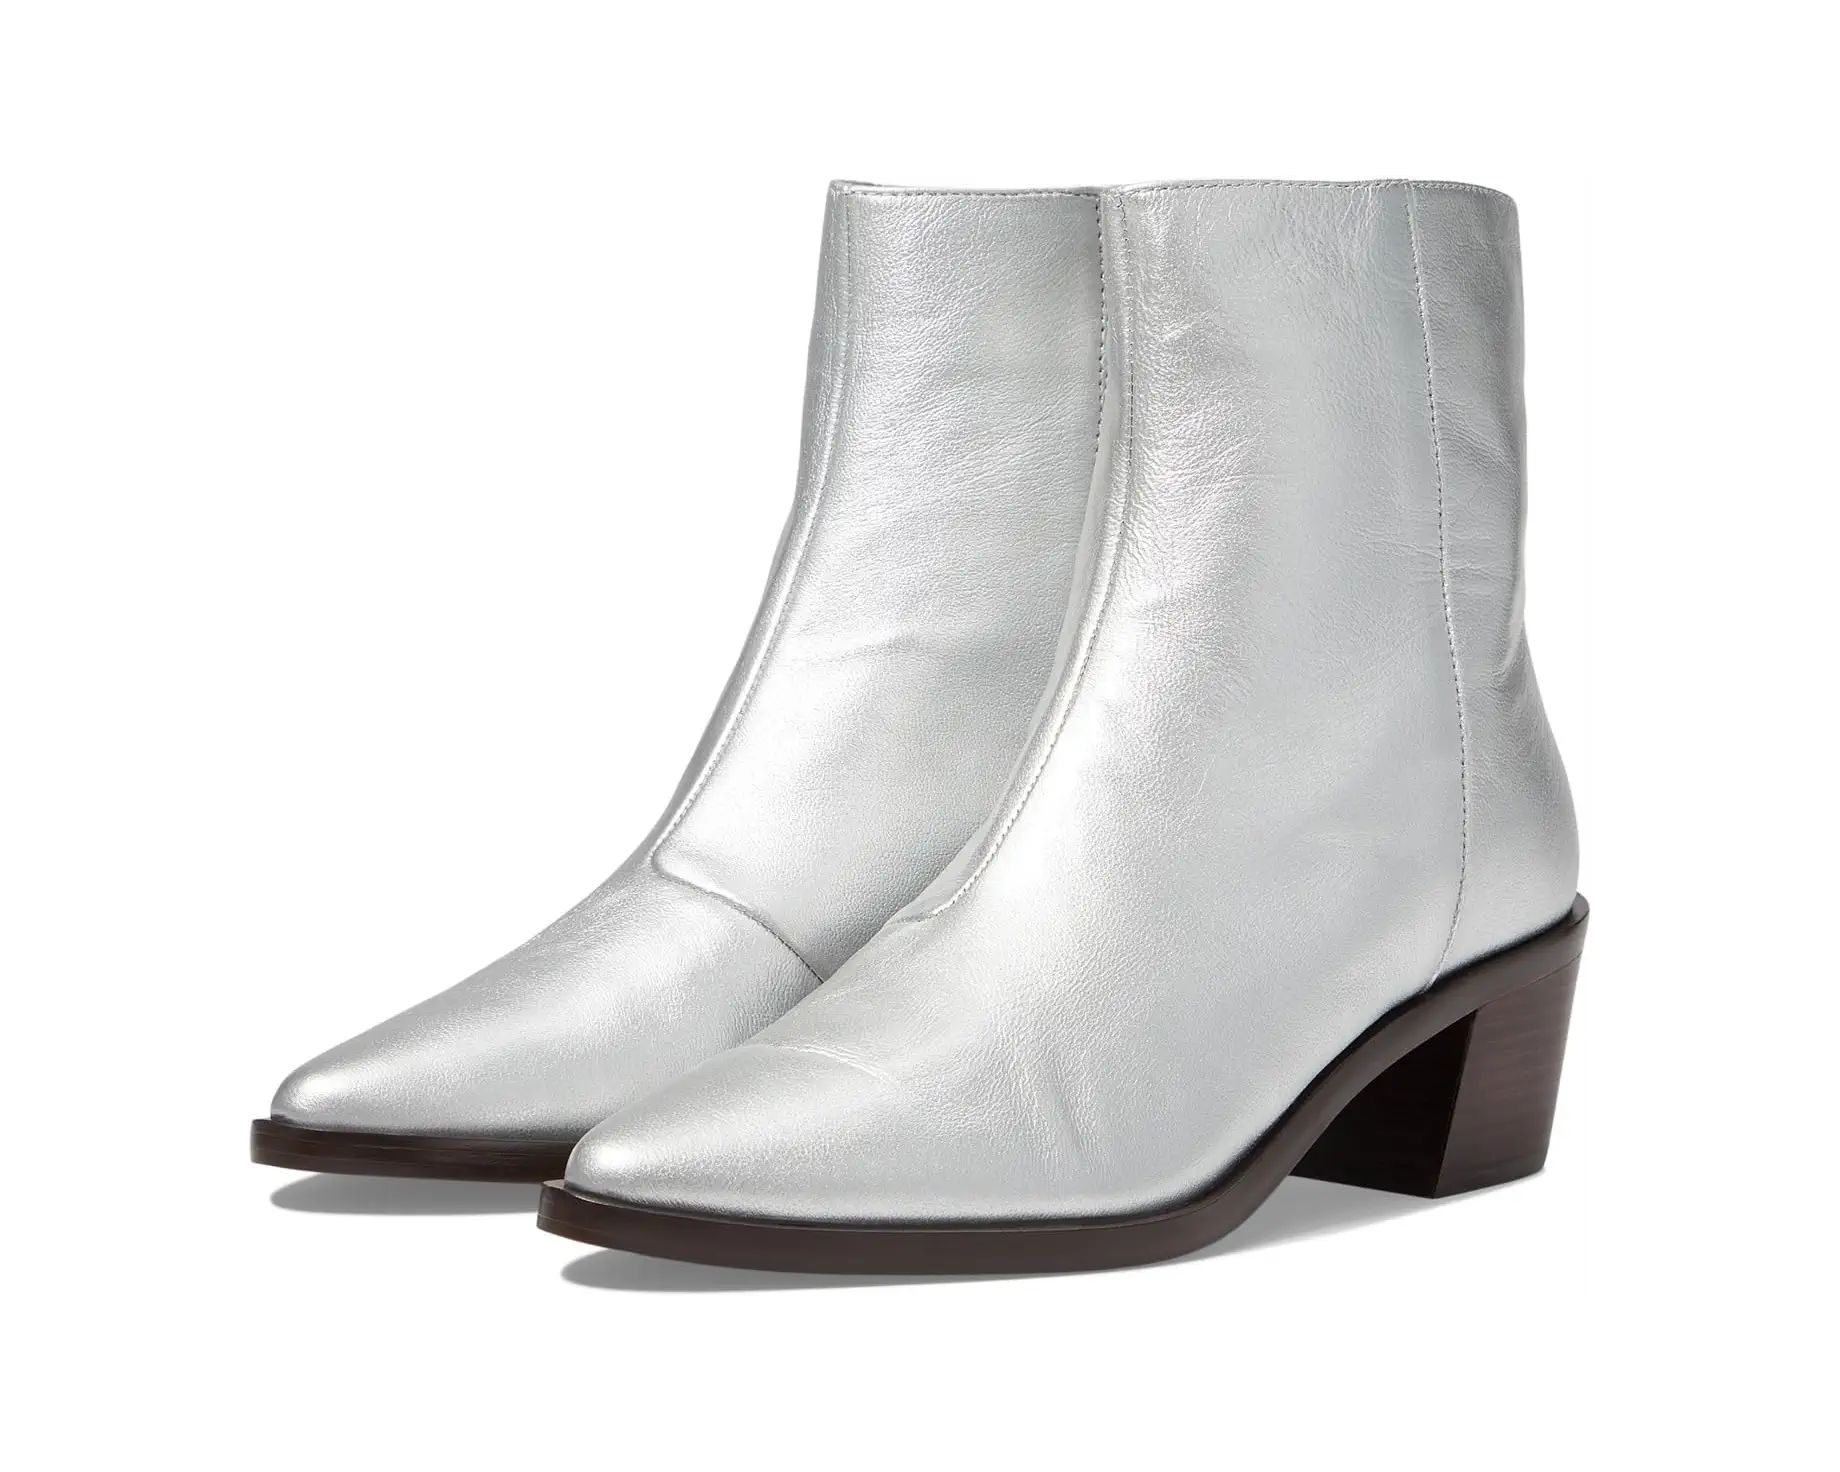 Madewell The Darcy Ankle Boot | Zappos